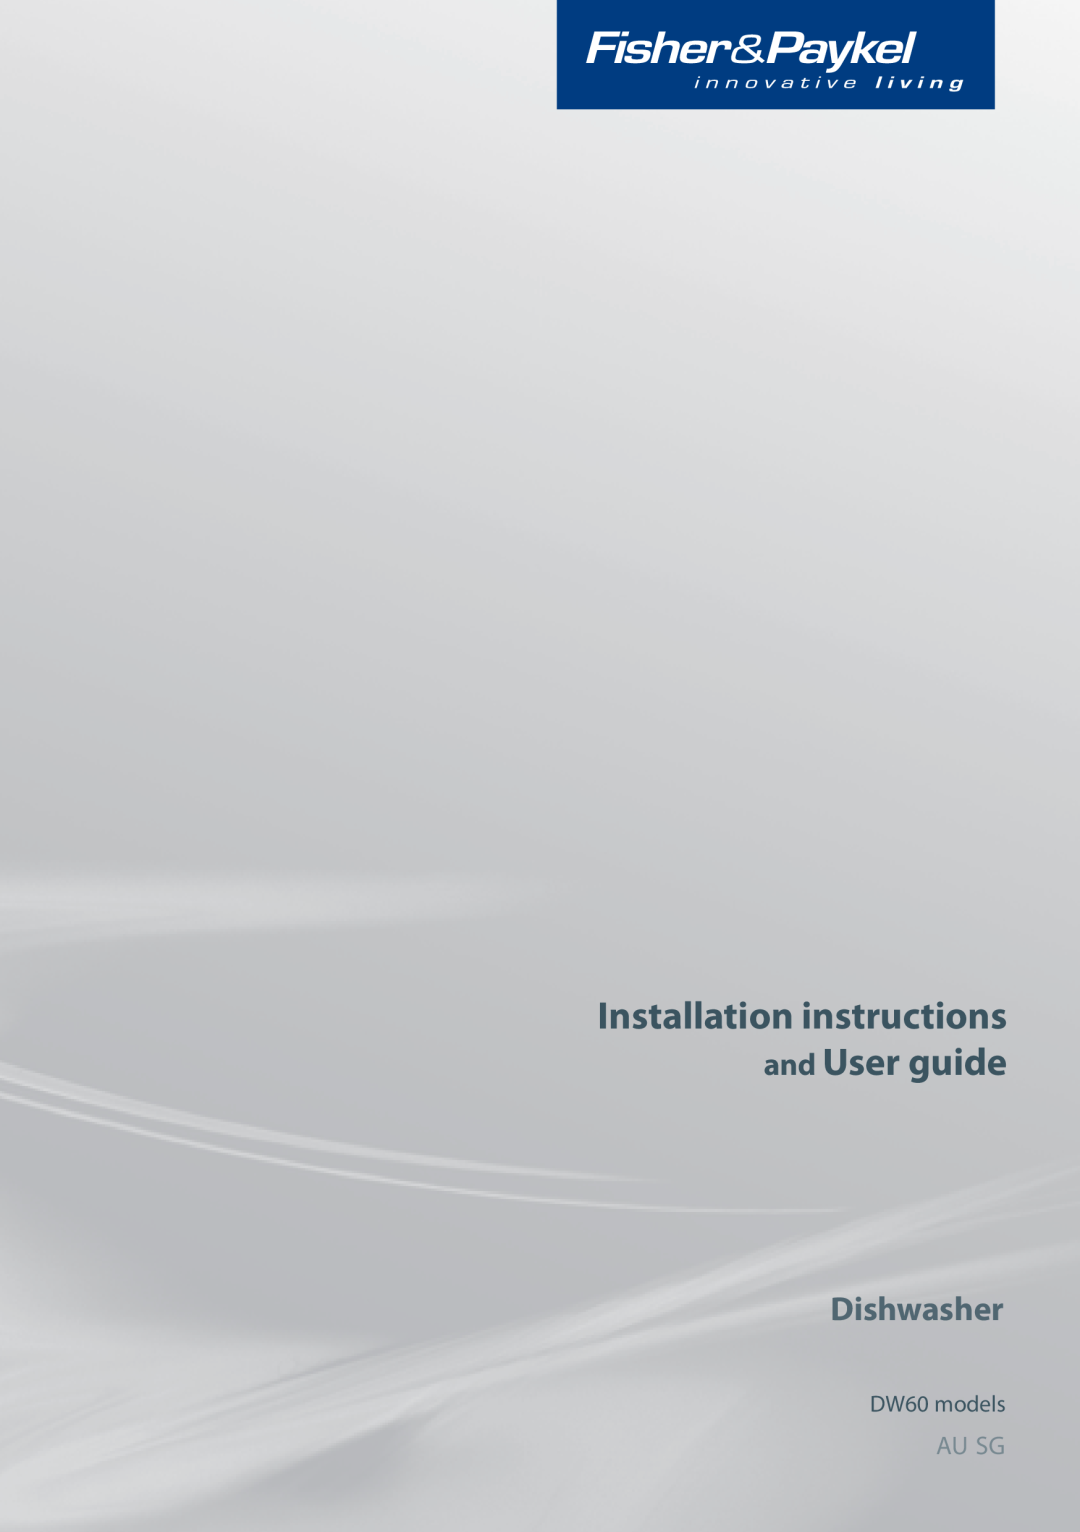 Fisher & Paykel DW60 installation instructions Installation instructions and User guide, Dishwasher, Au Sg 